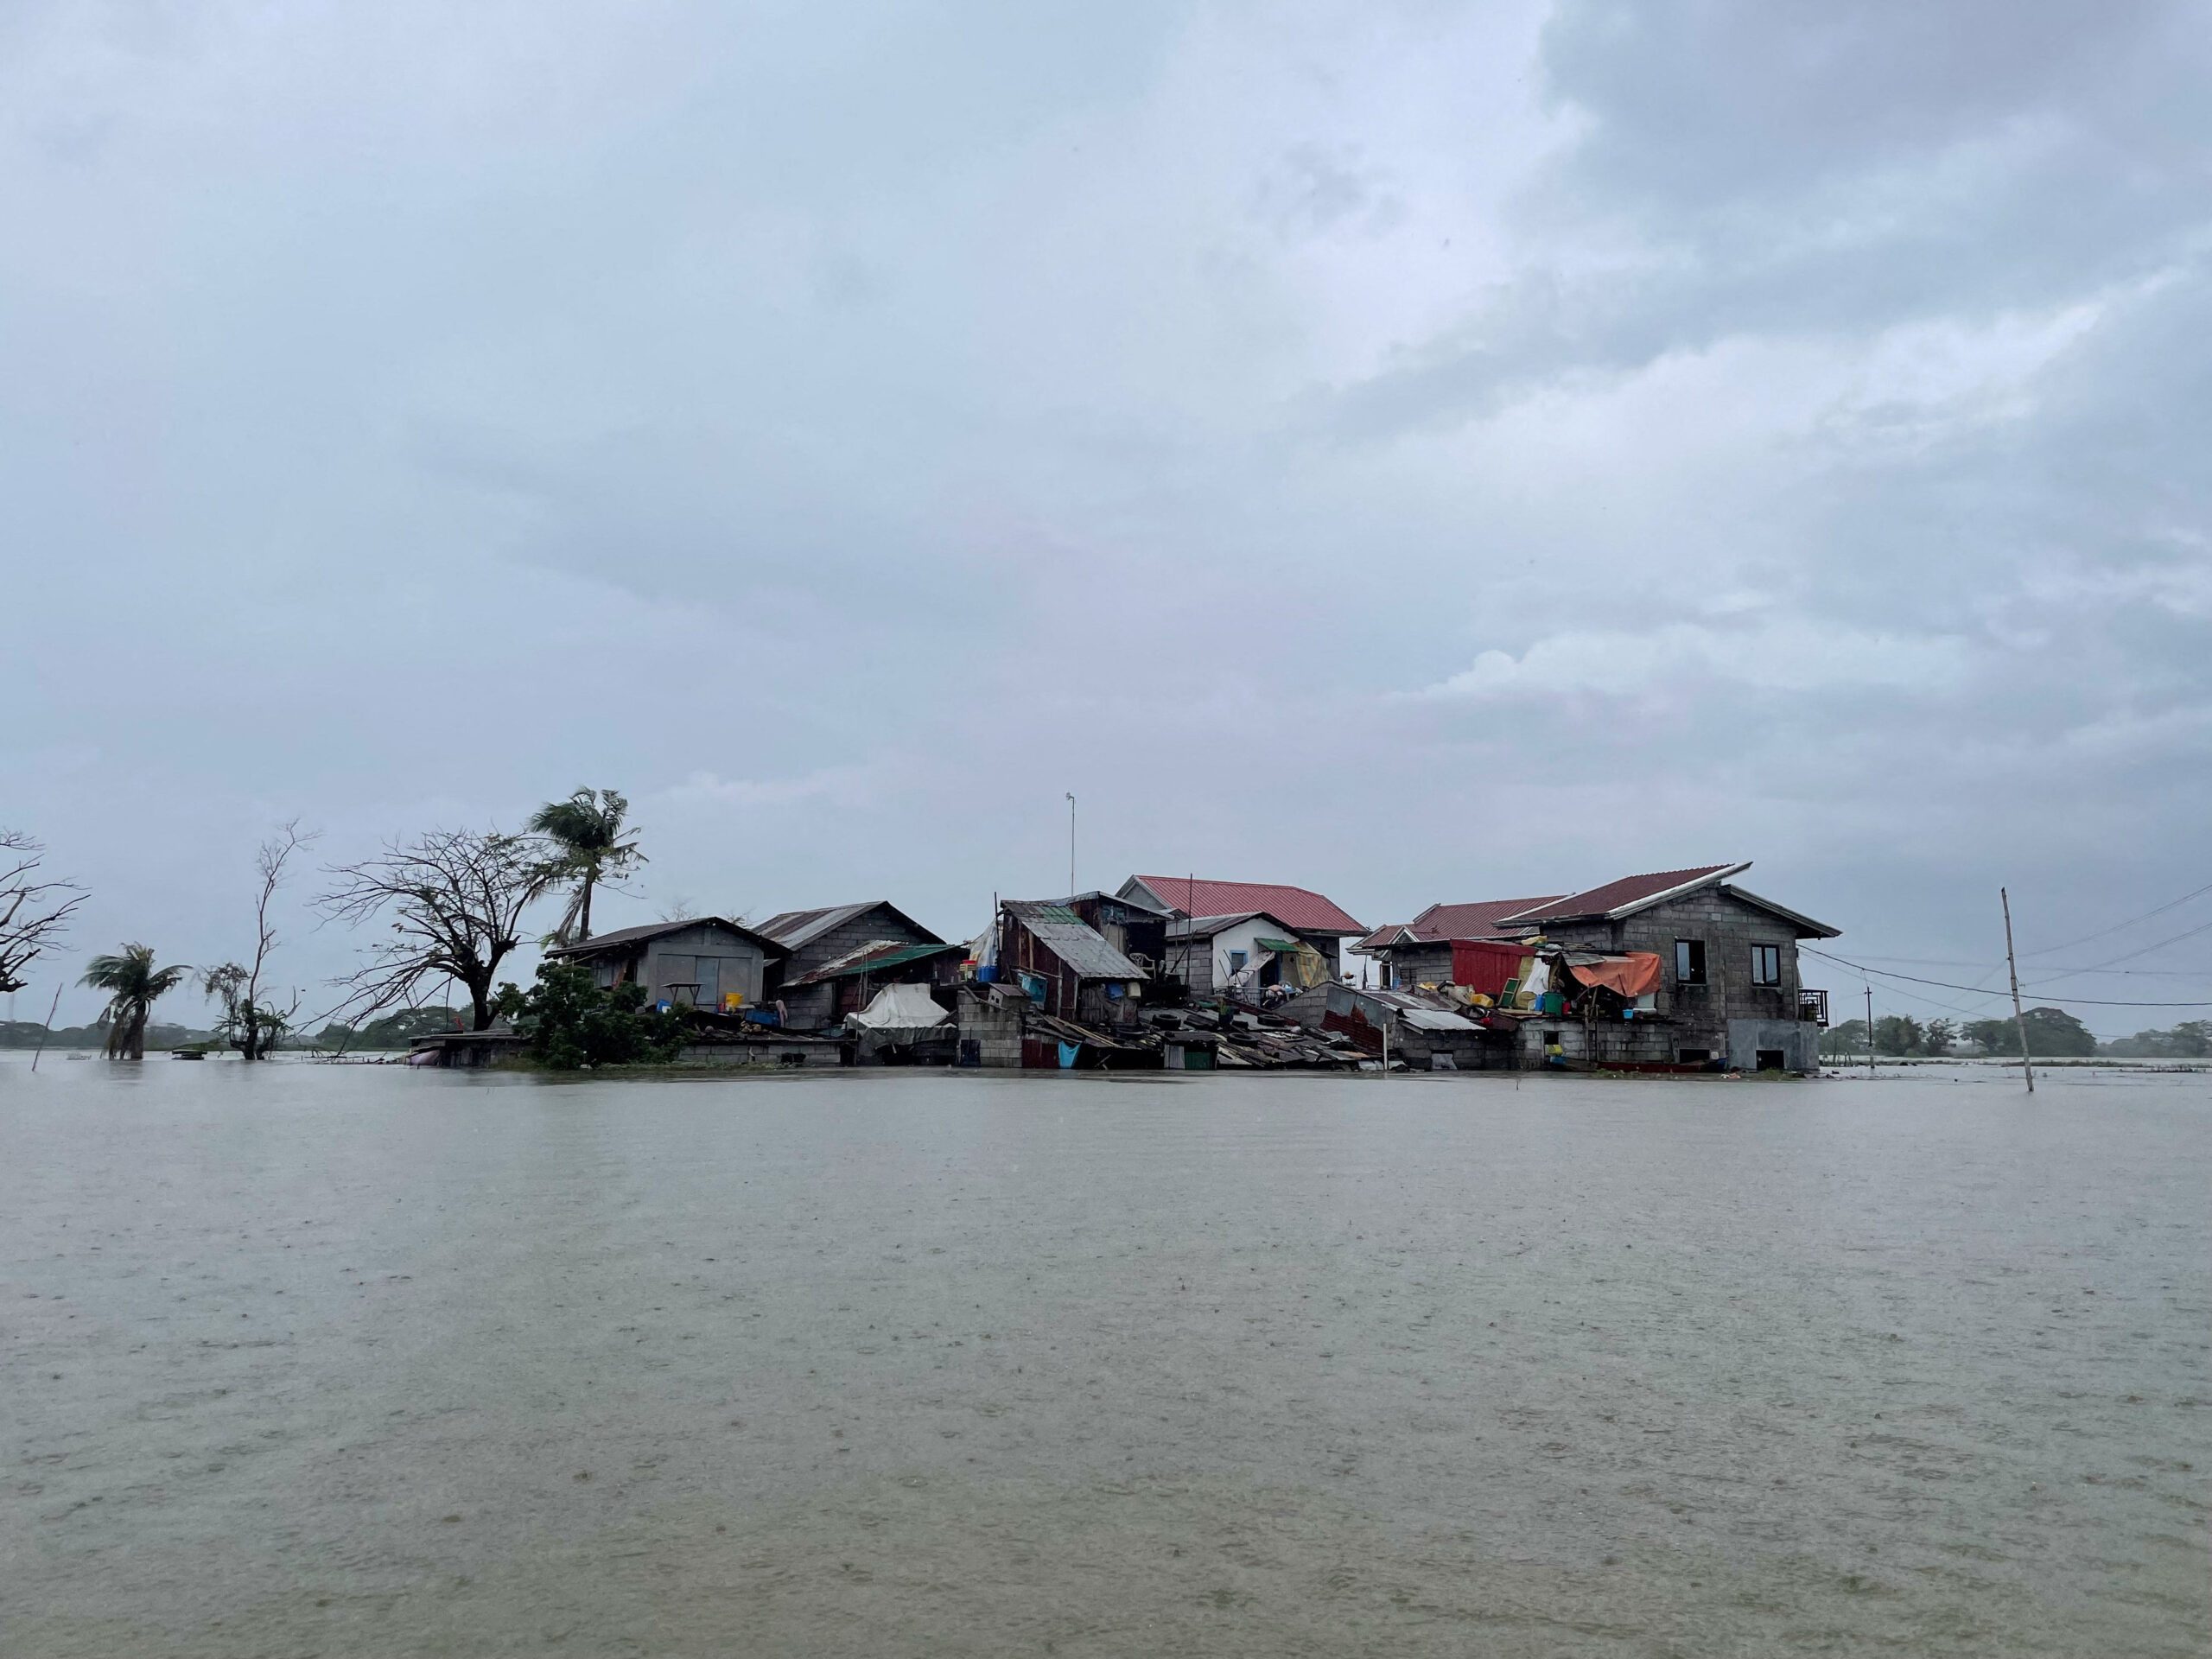 Bulacan governor says Bustos Dam one cause of intense flooding in province